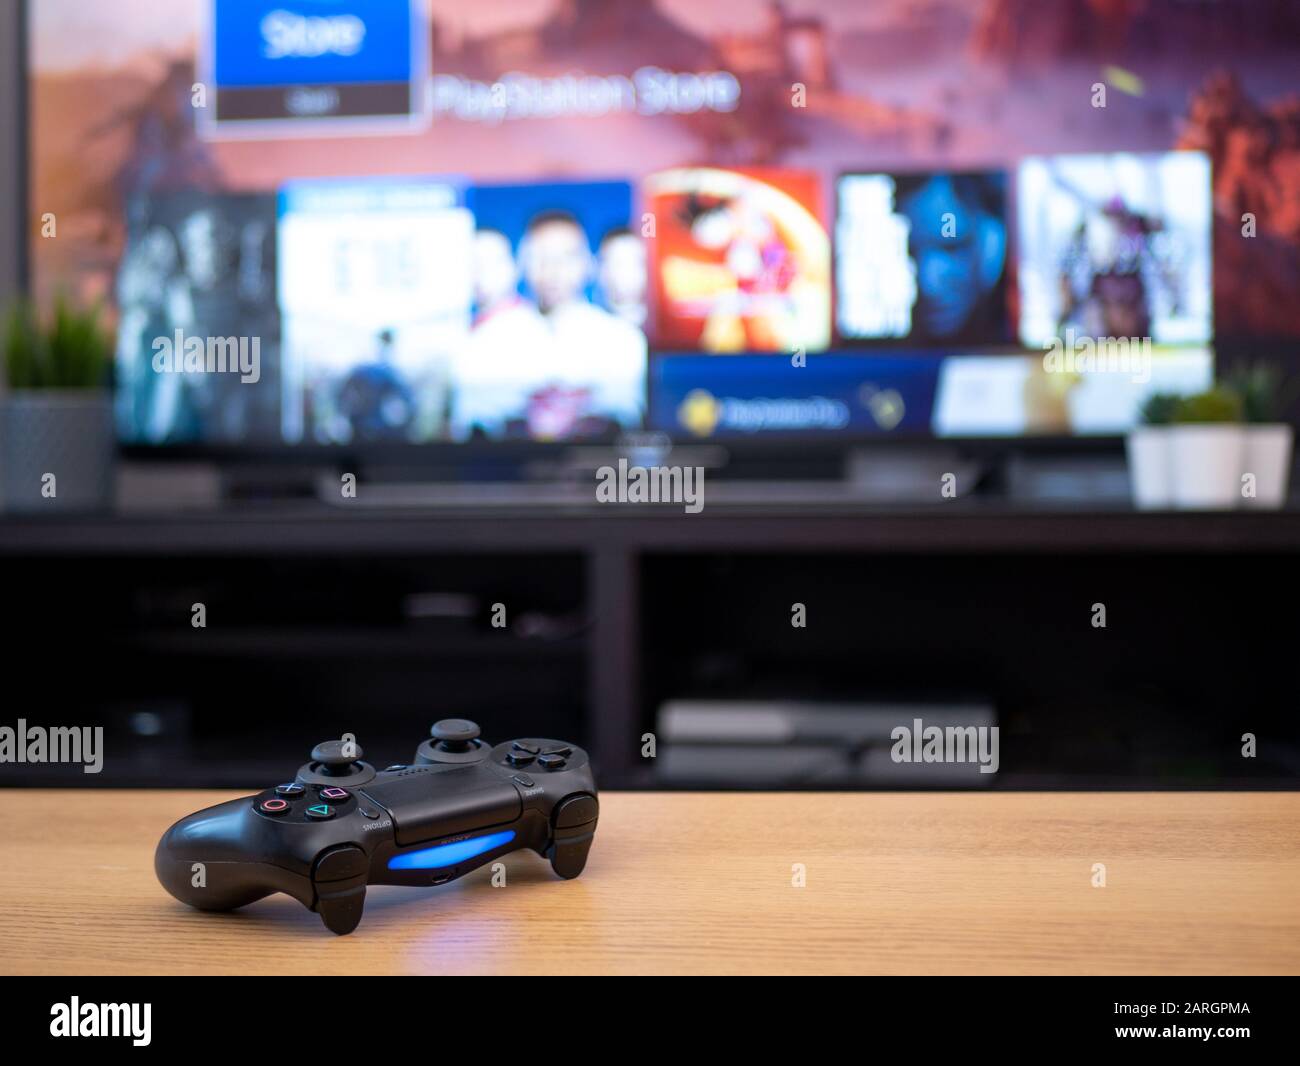 UK, Jan 2020: Sony dualshock 4 controller remote for Playstation 4 with tv screen in background Stock Photo